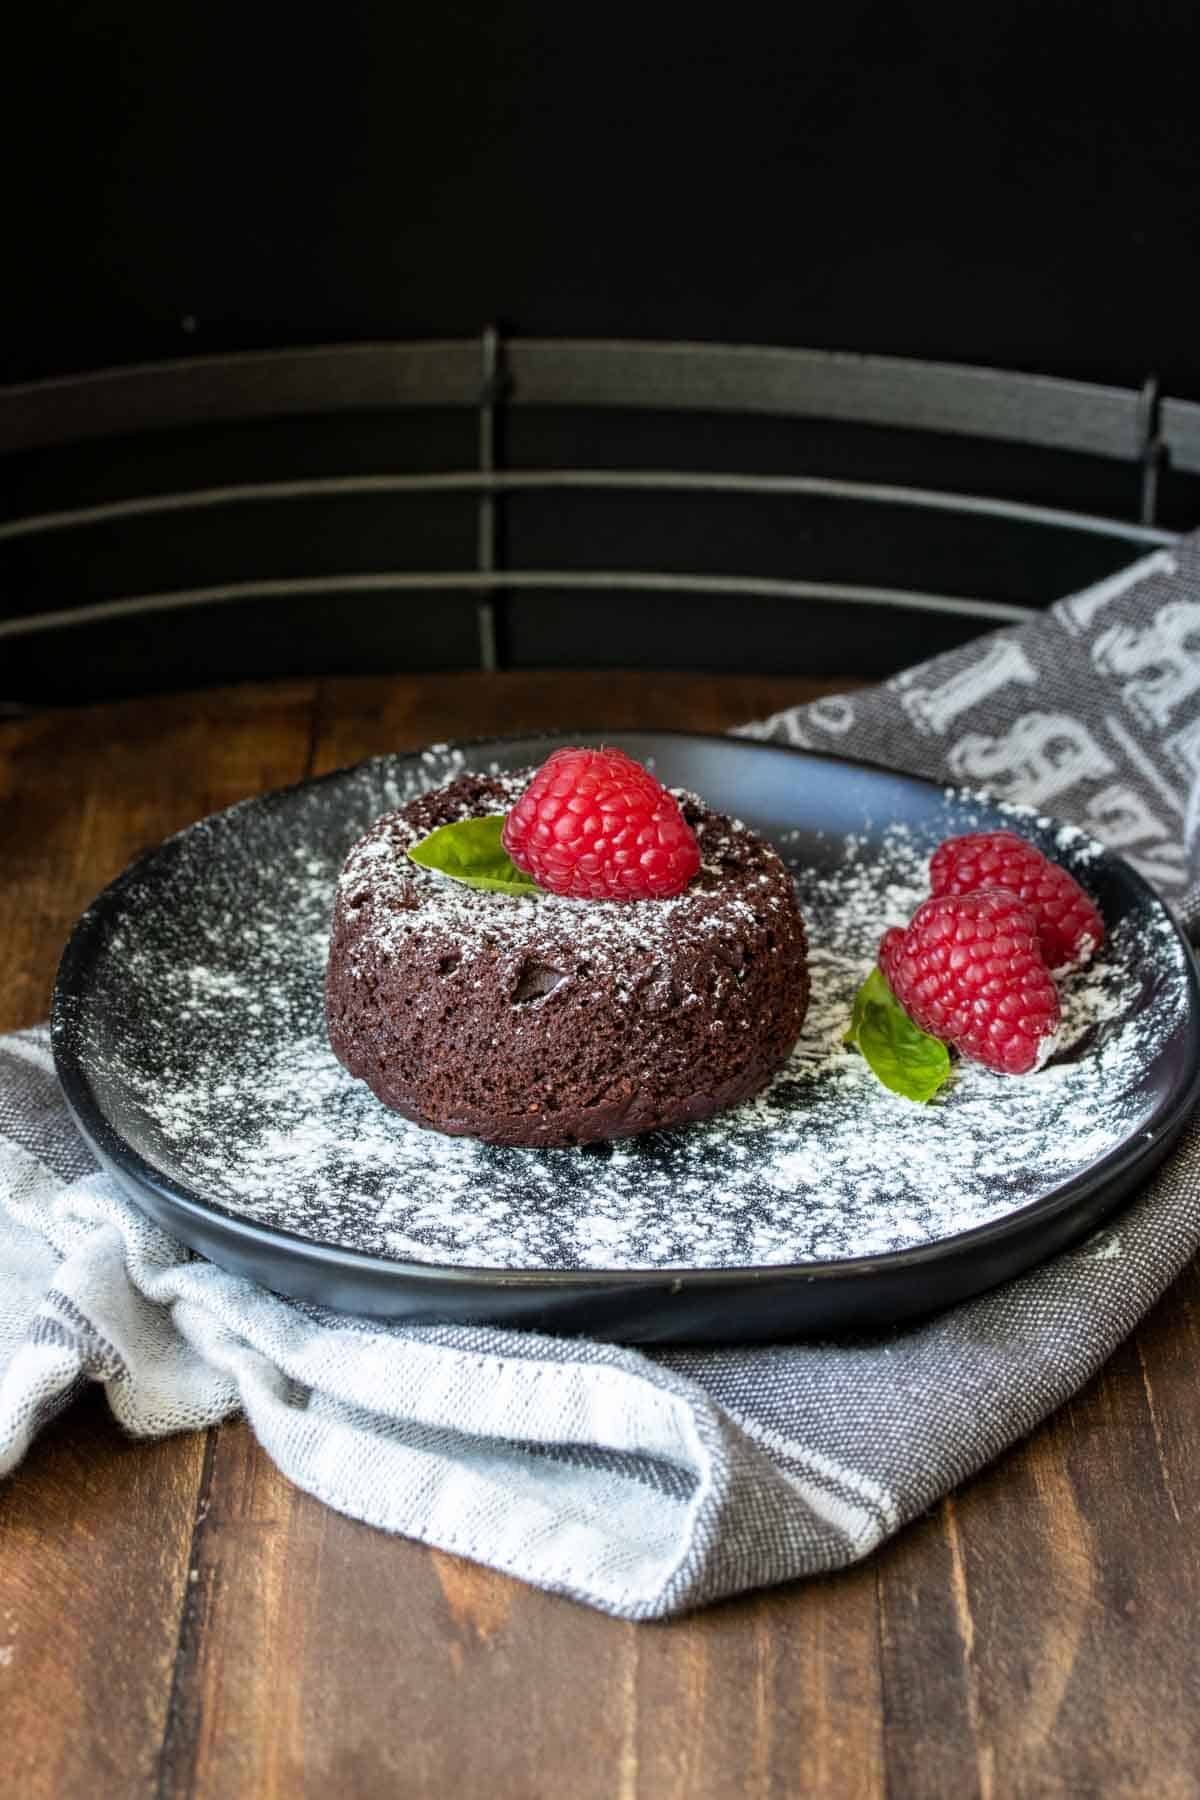 A mini chocolate cake dusted with powdered sugar on a black plate.